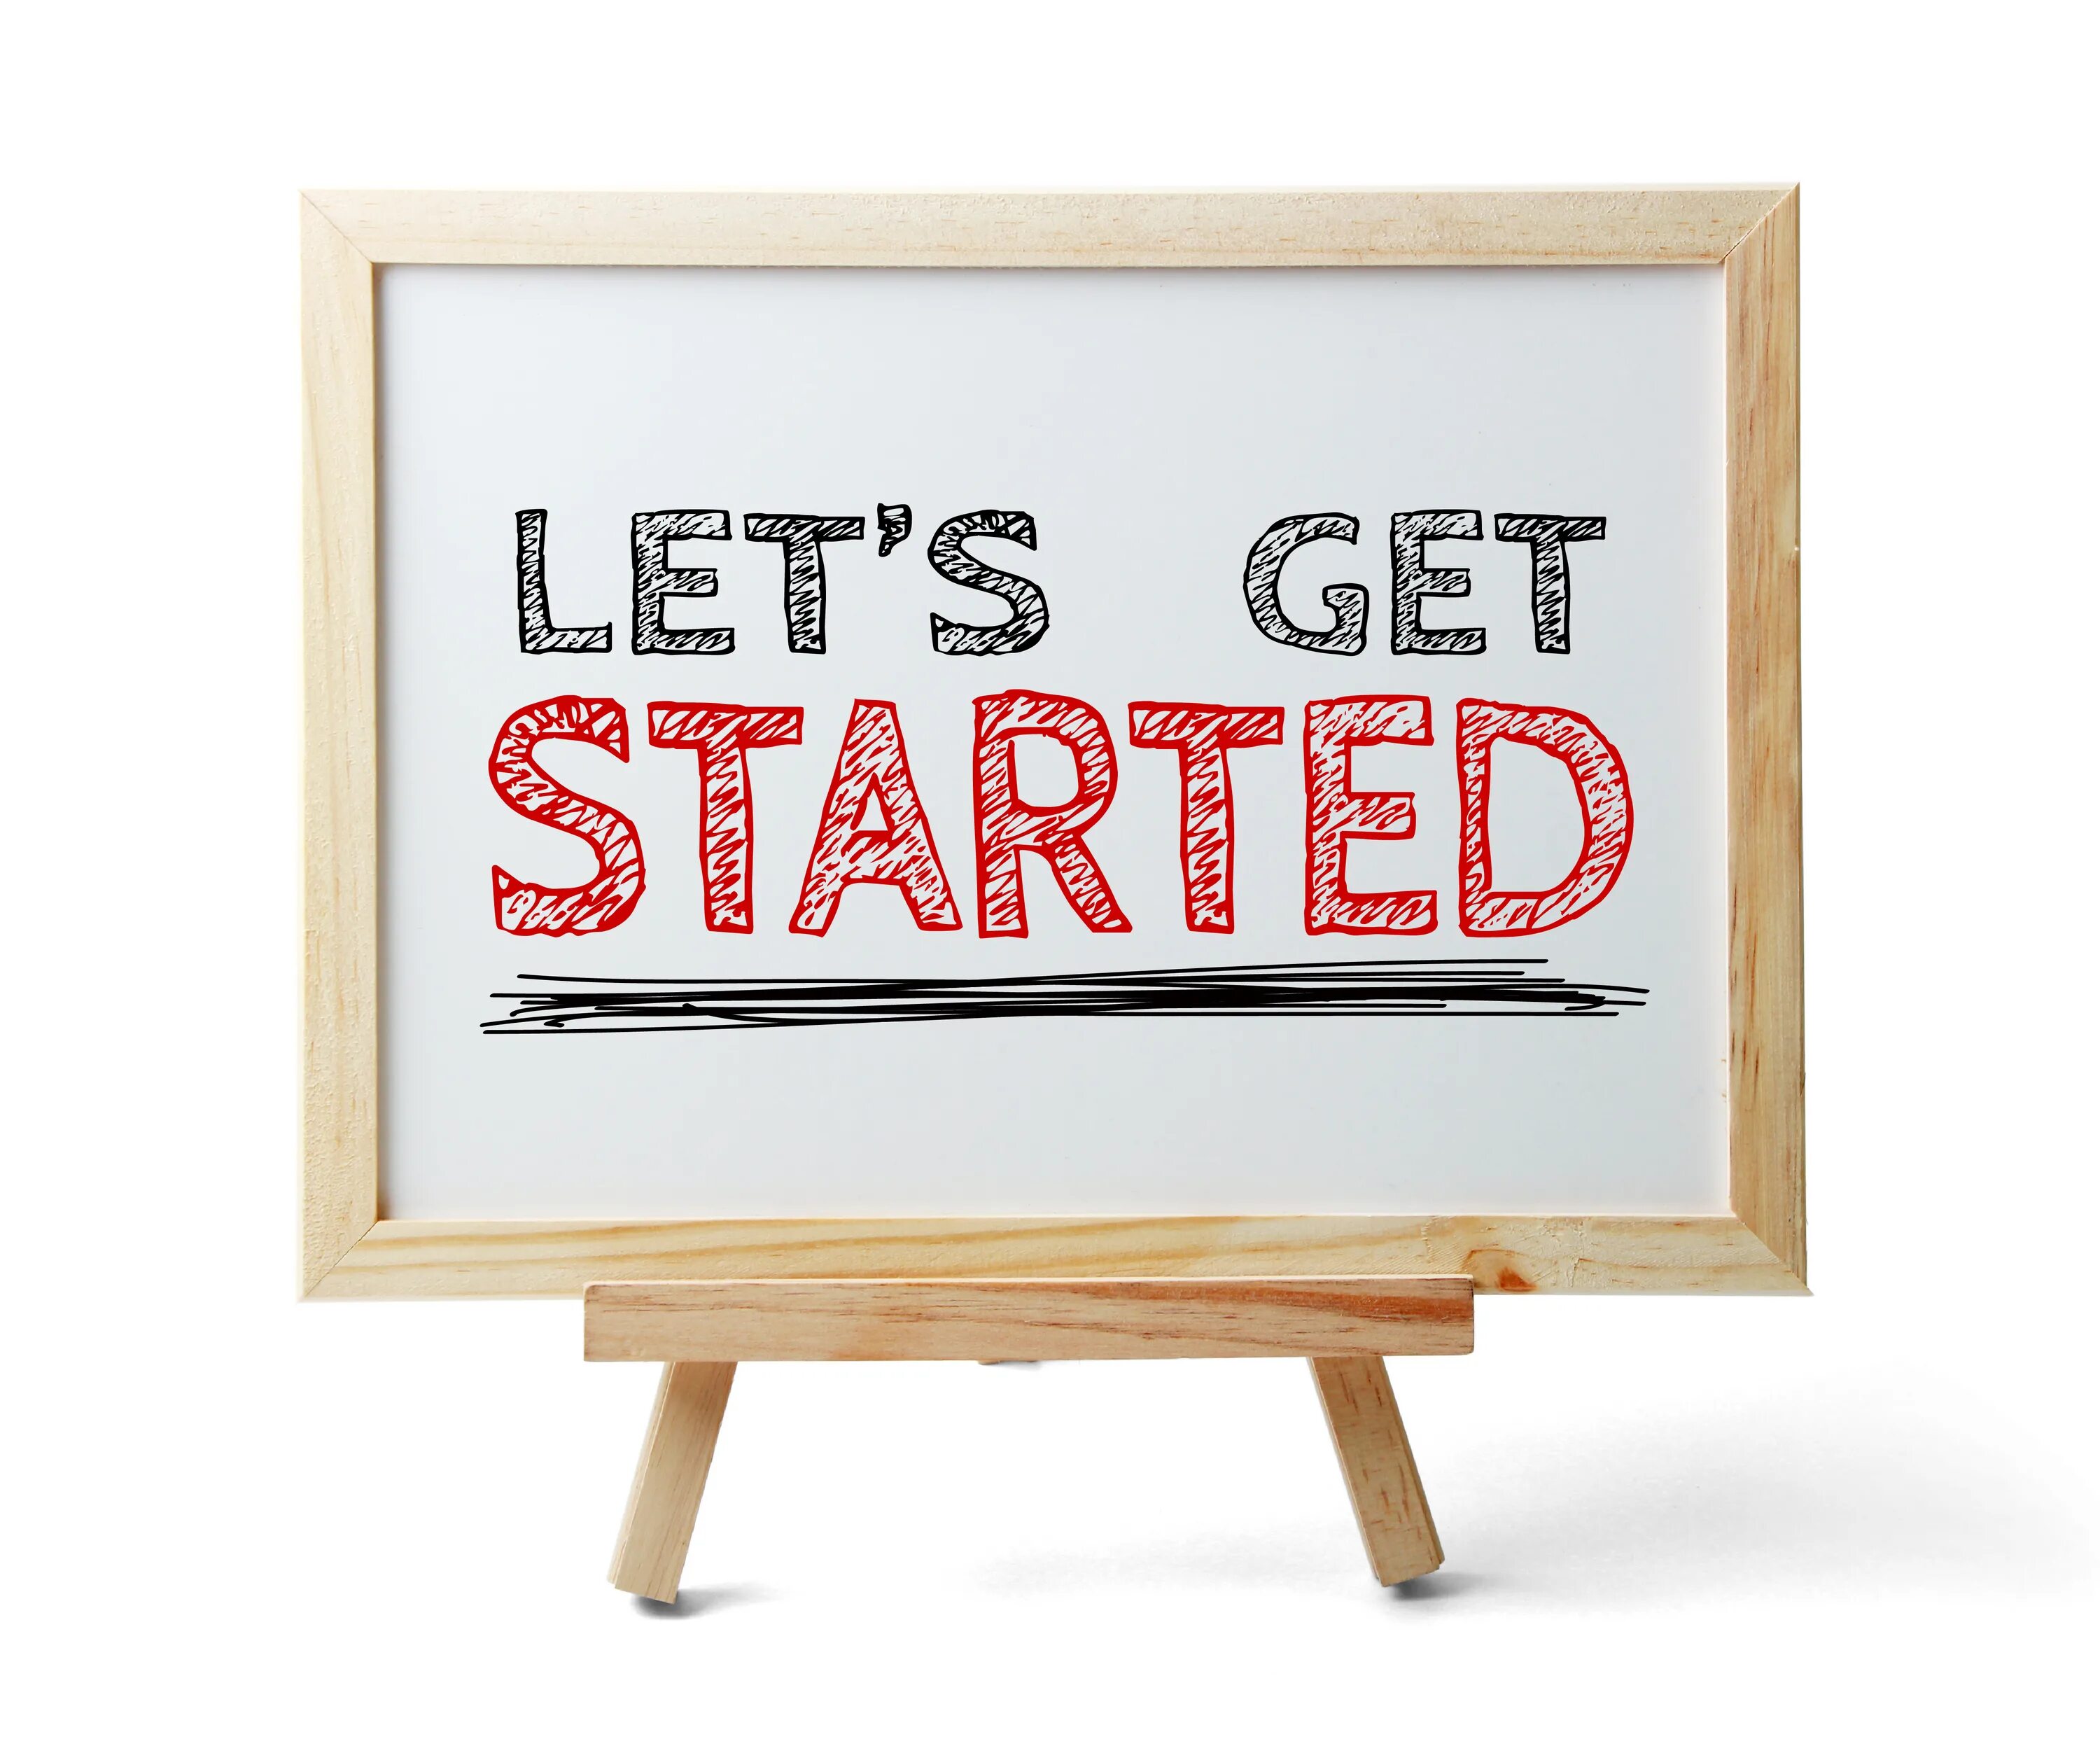 We well get started. Let s get started. Картина start. Lets get it started. Let`s get started картинка.